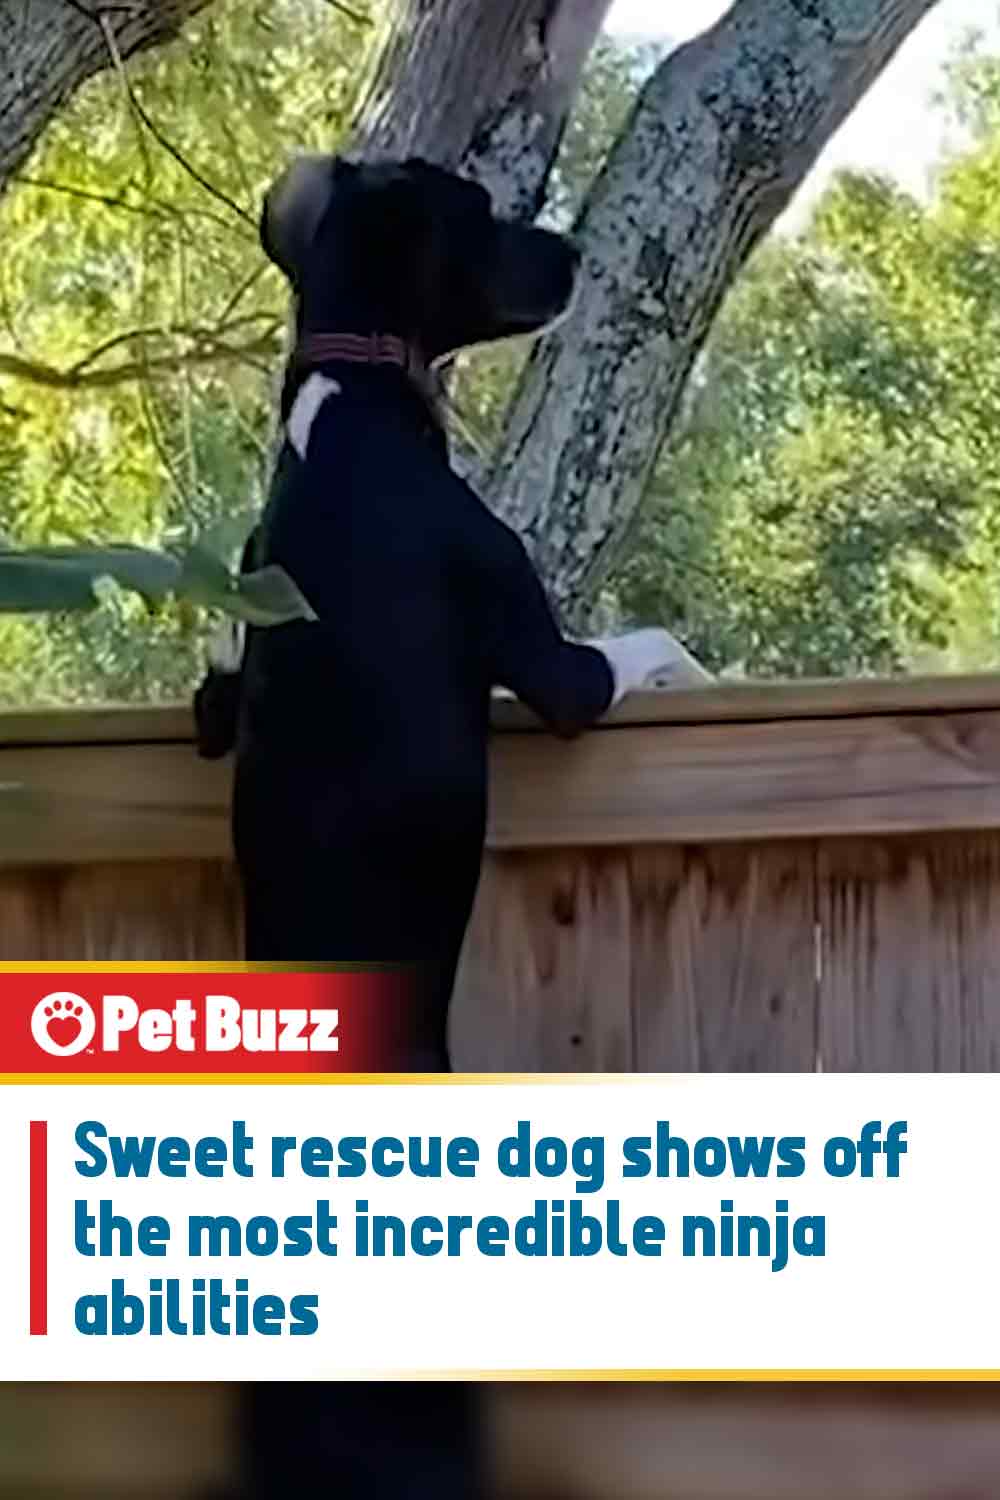 Sweet rescue dog shows off the most incredible ninja abilities